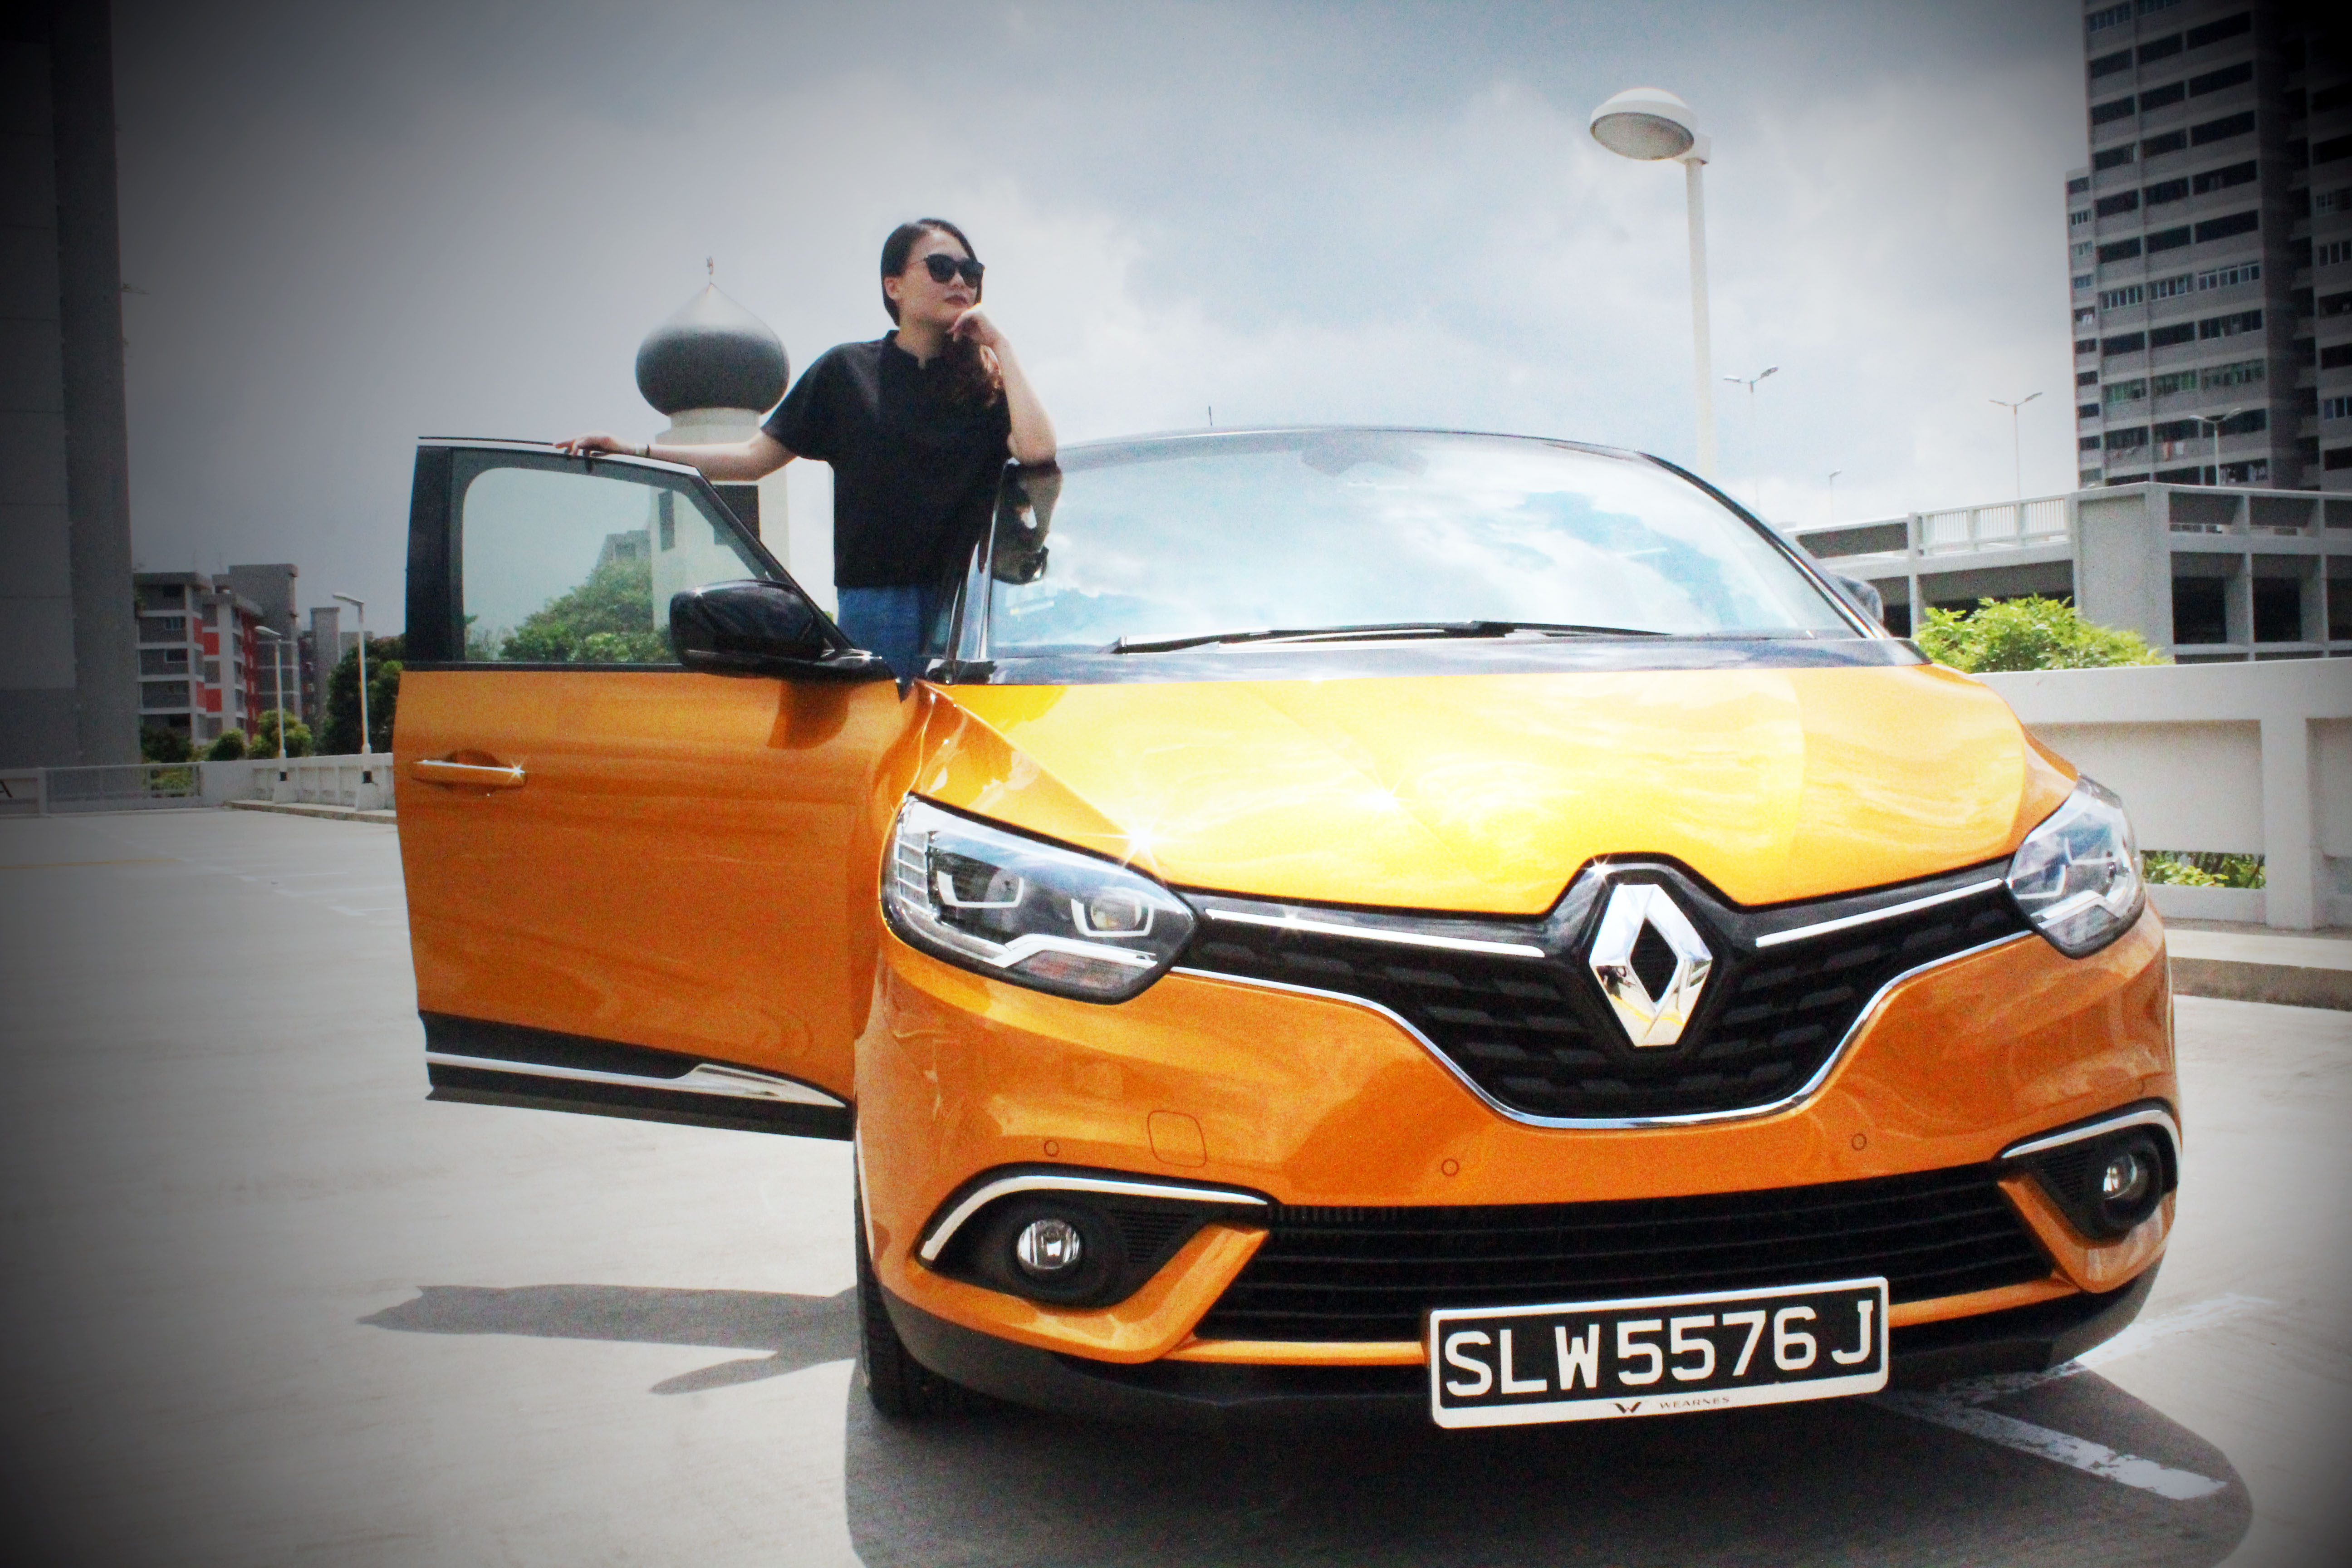 The all new Renault Scenic looks amazing